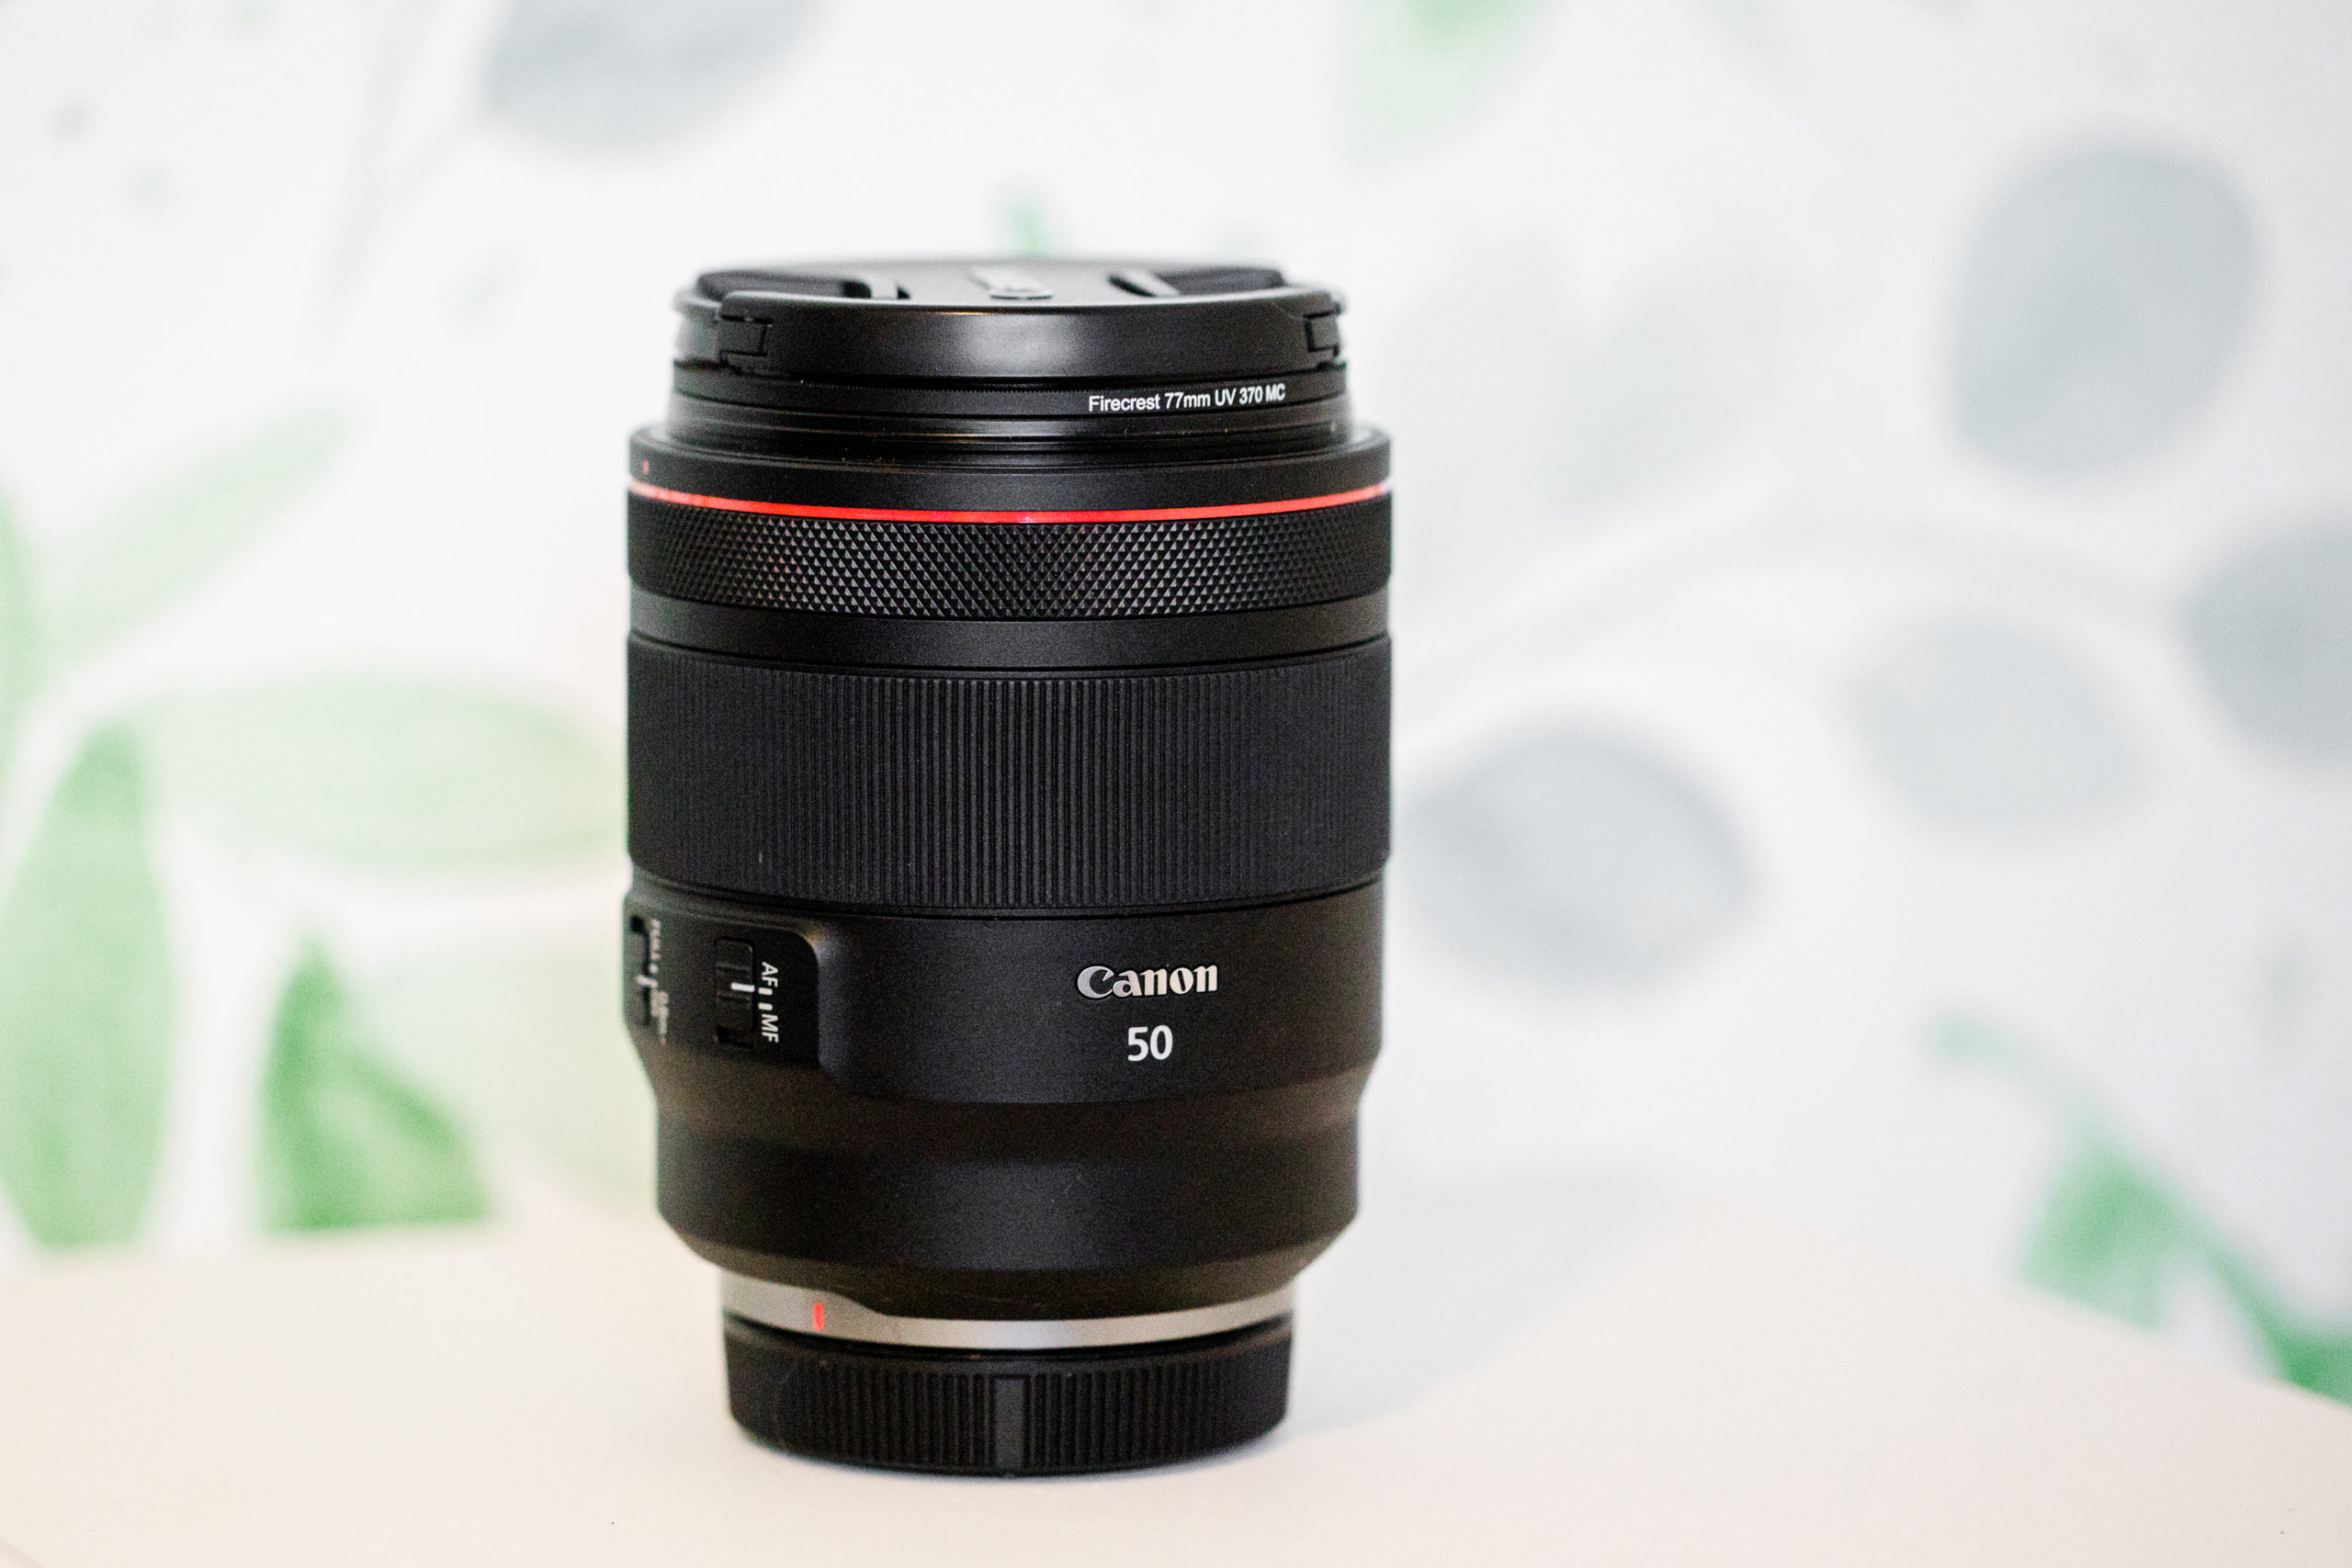 50mm lens from Canon's RF line